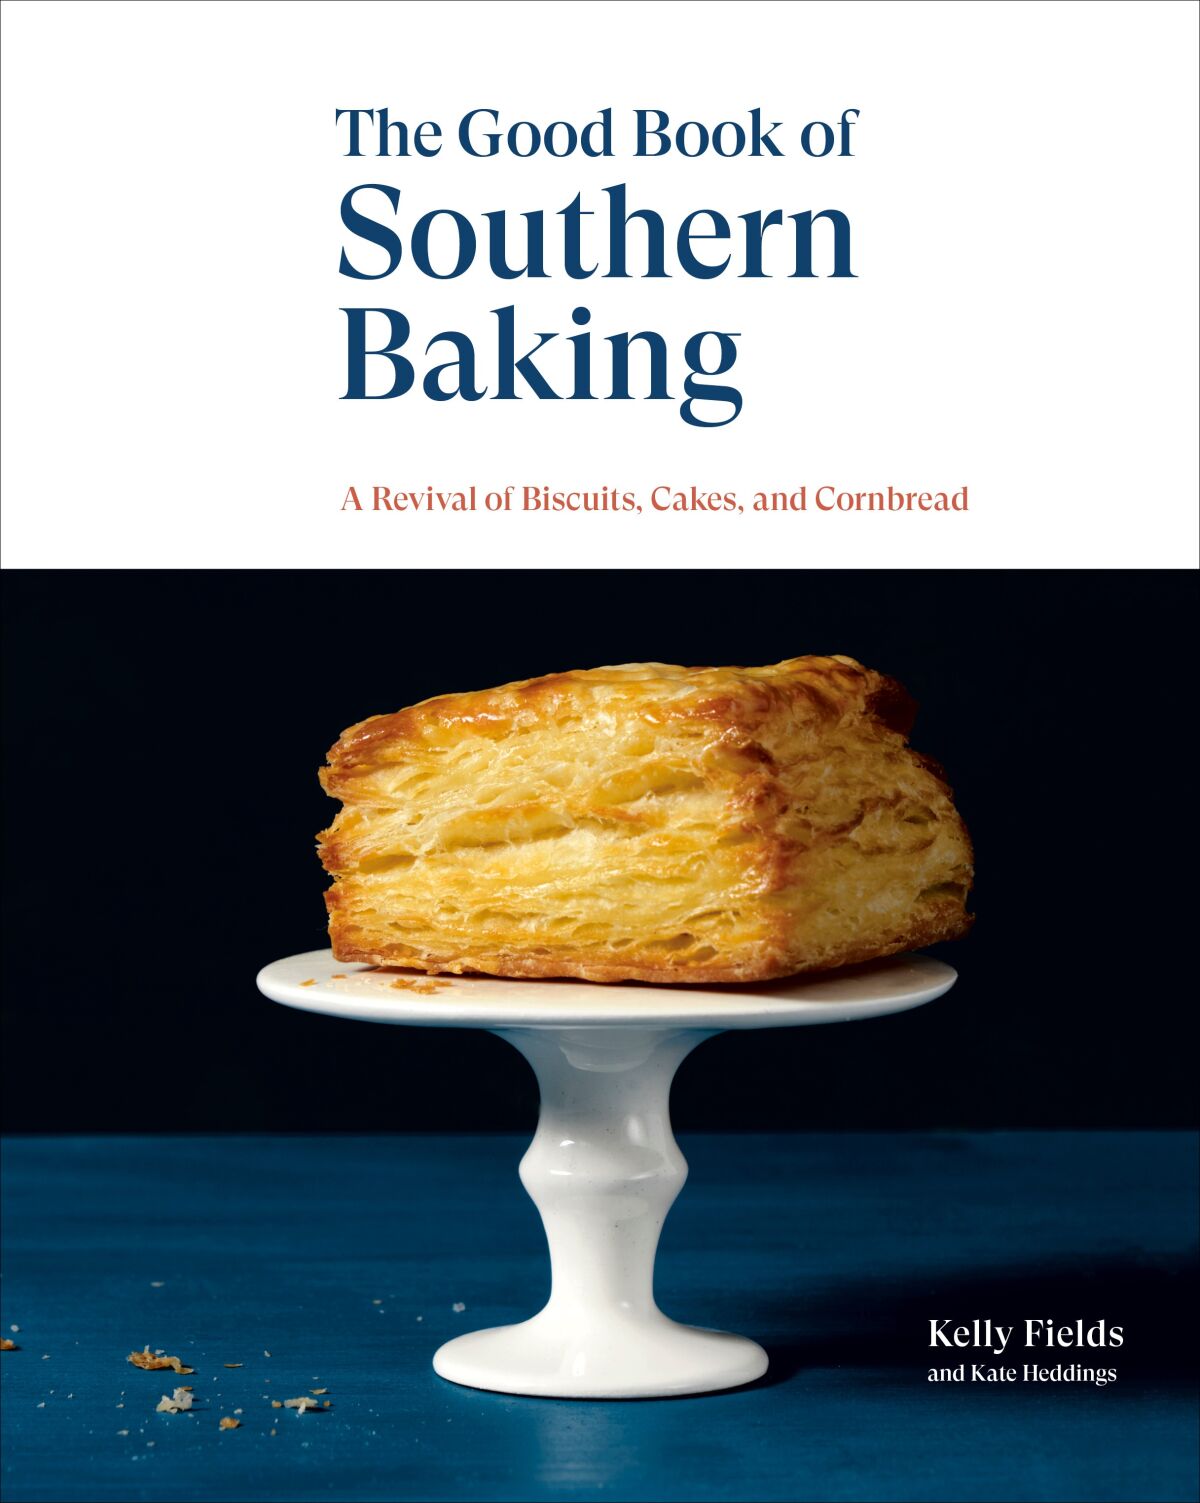 The Good Book of Southern Baking: A Revival of Biscuits, Cakes, and Cornbread by Kelly Fields and Kate Heddings